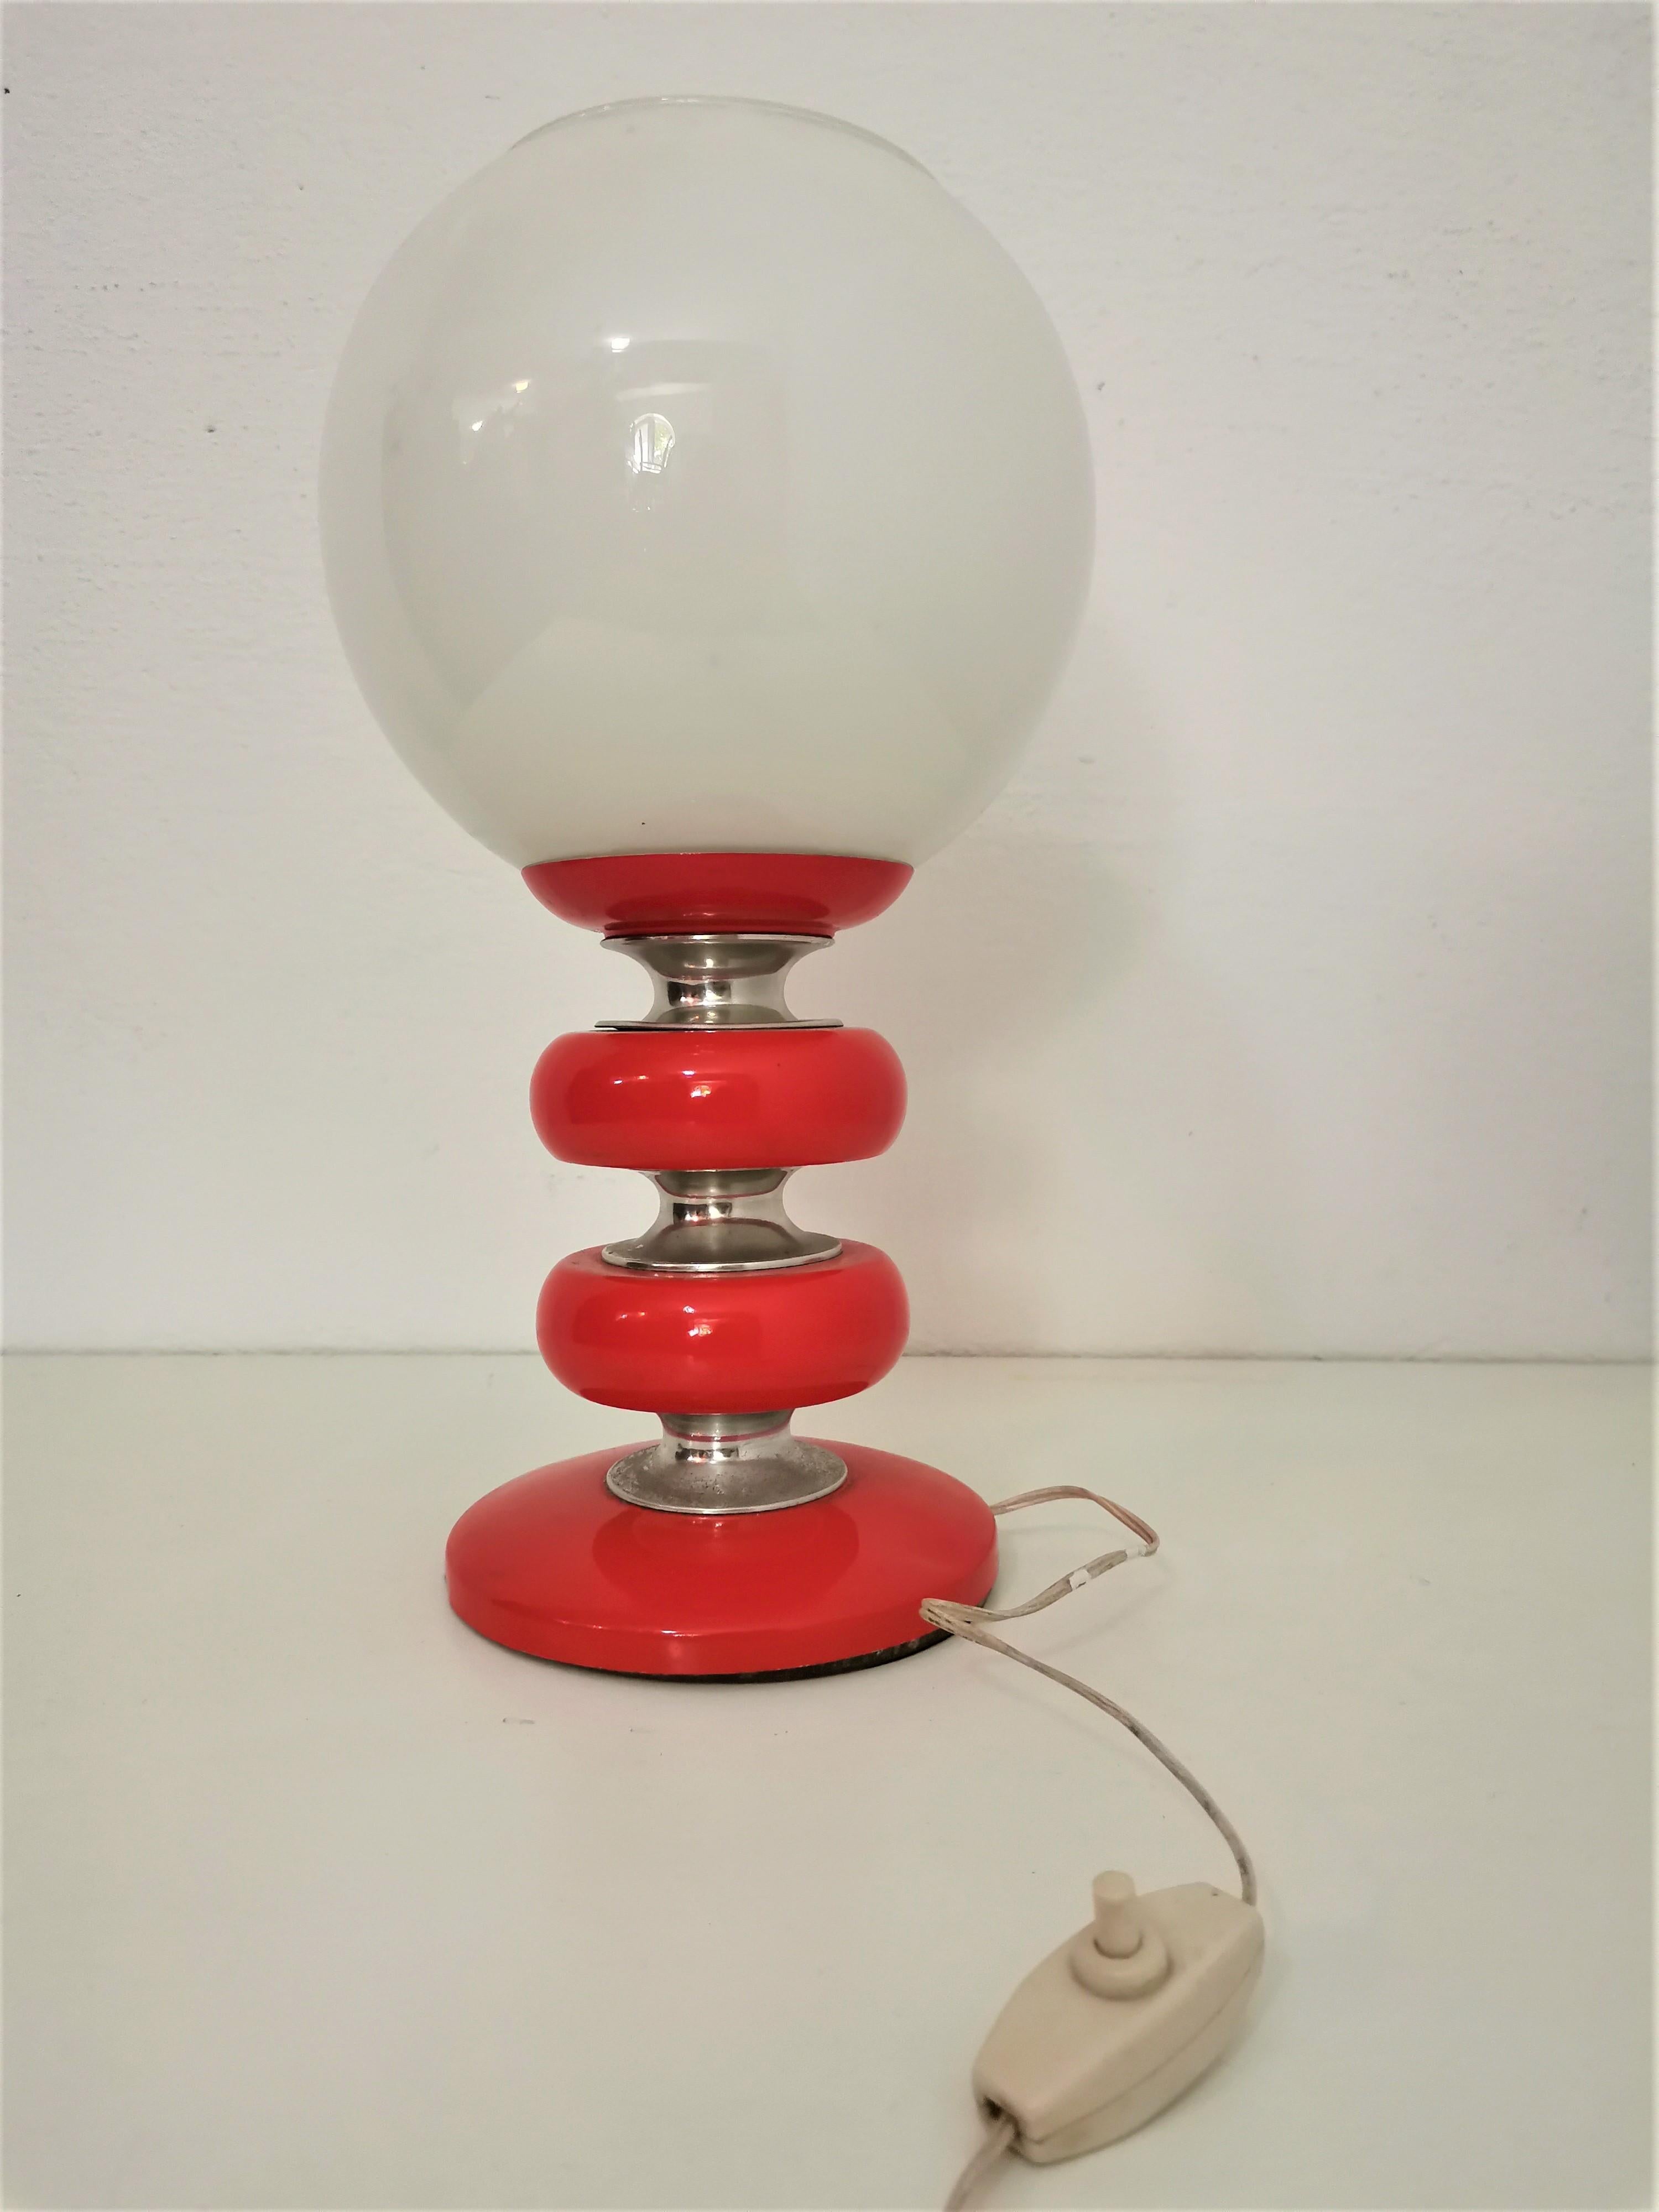 Table lamp

Period: 1970s

Country of Manufacturer: Italy

Materials: wood, metal parts, opaline glass

Colours: red, white, chrome

Condition: very good original vintage condition, fully functional

Style: midcentury modern, Classic.